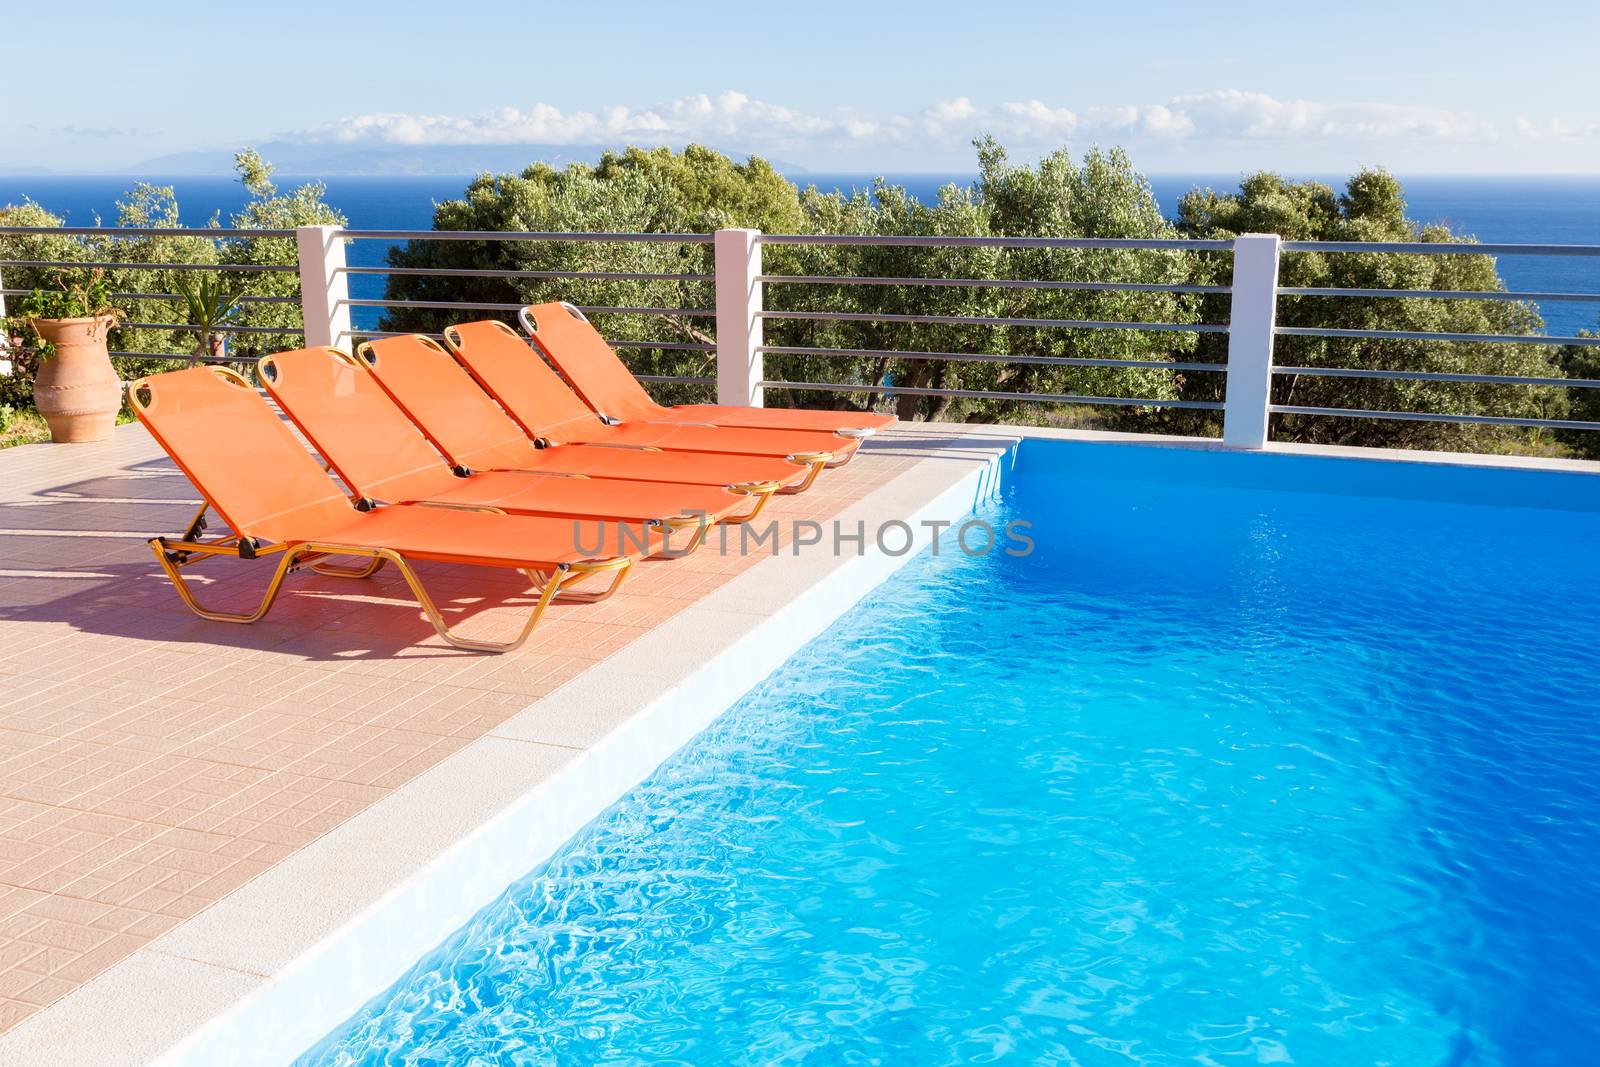 Row of orange loungers near blue swimming pool by BenSchonewille